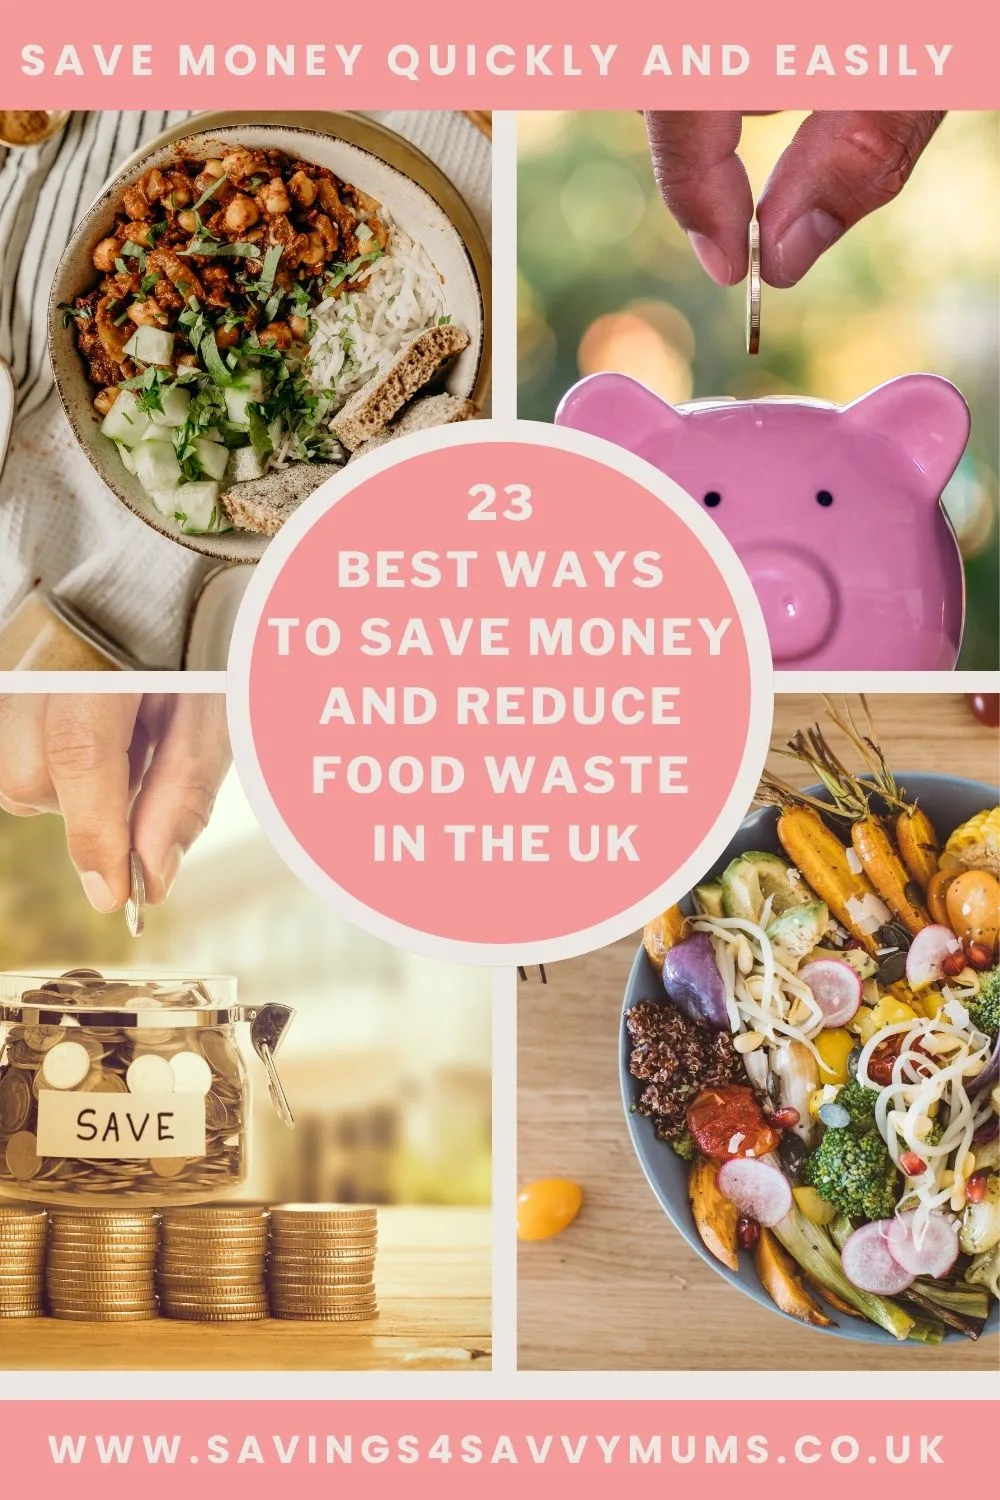 Here are 23 best ways to save money and reduce food waste if you live in the UK. We give you practical tips on how to keep more money in your pocket by Laura at Savings 4 Savvy Mums 